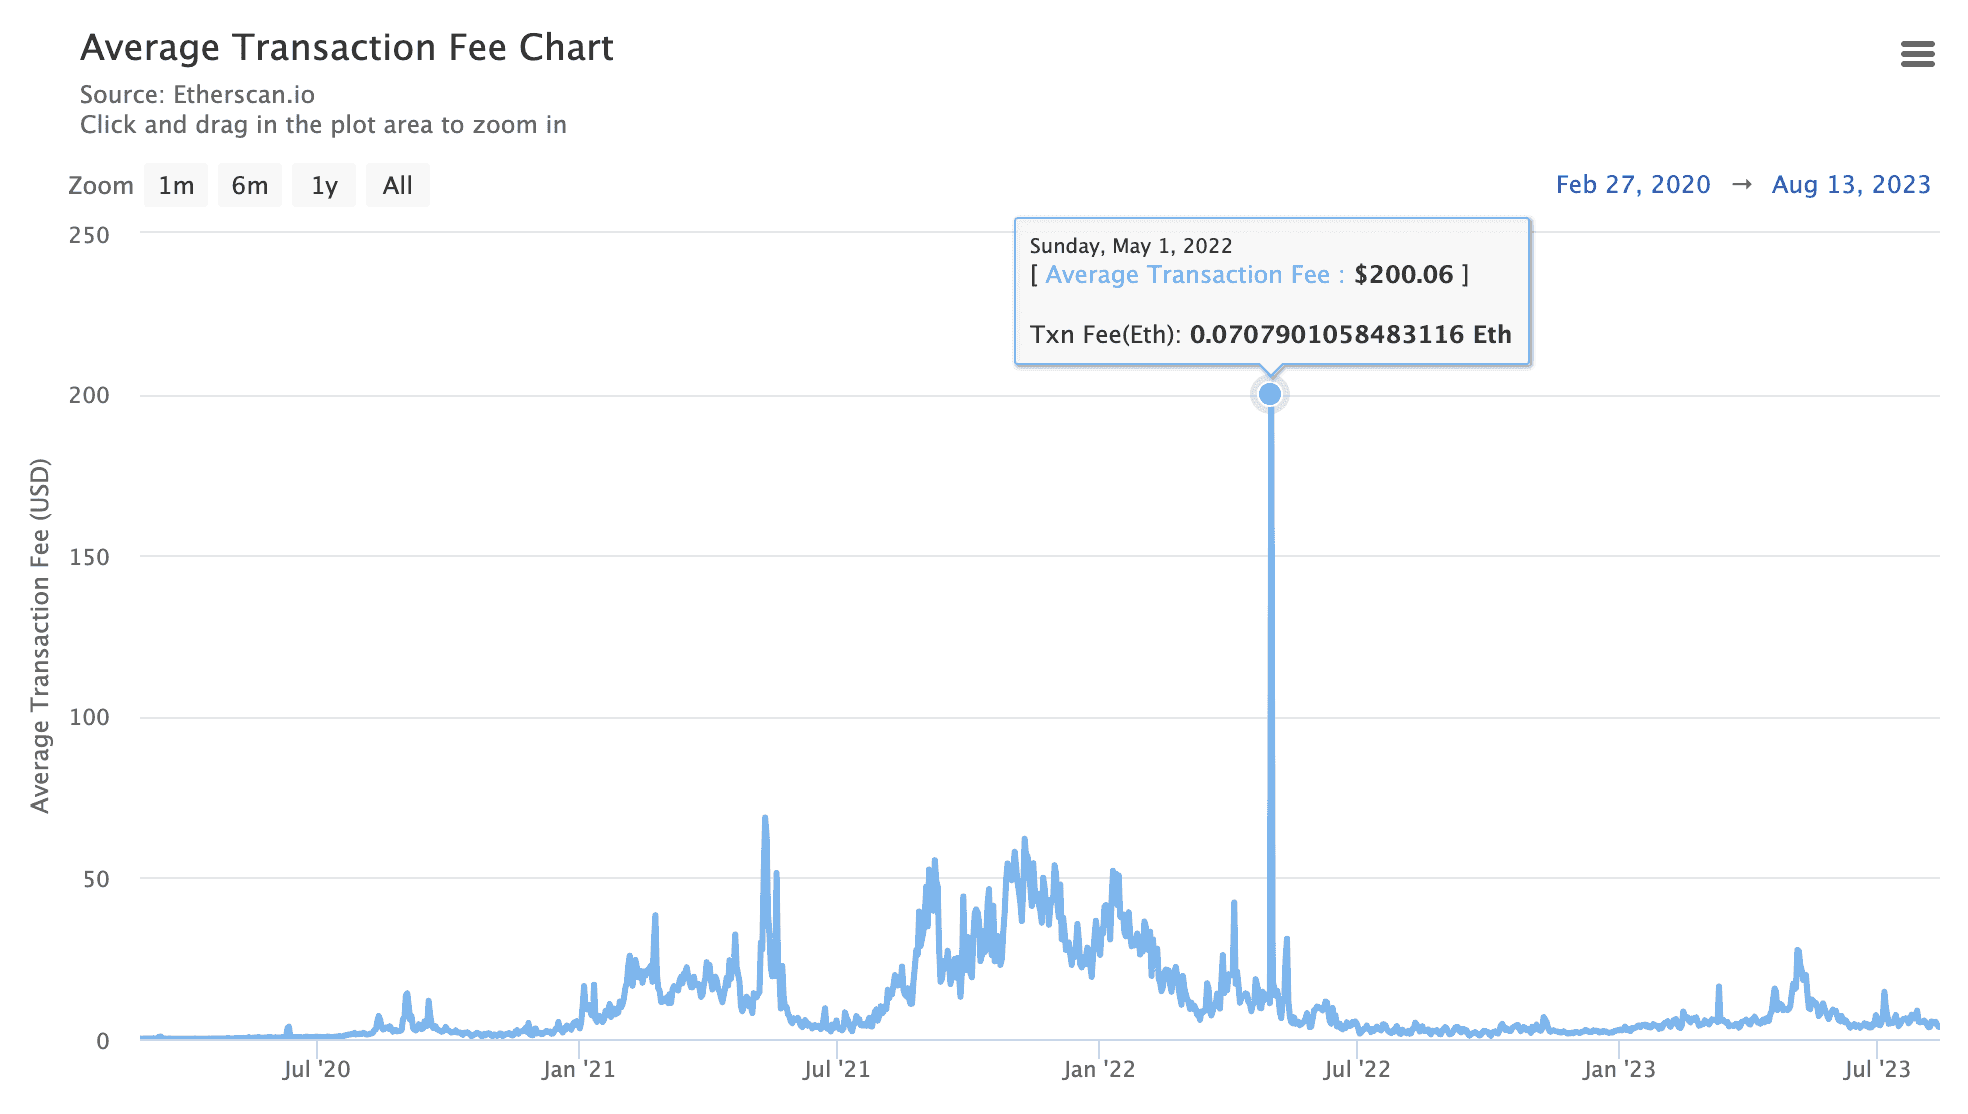 Average Daily Transaction Fees in Ethereum